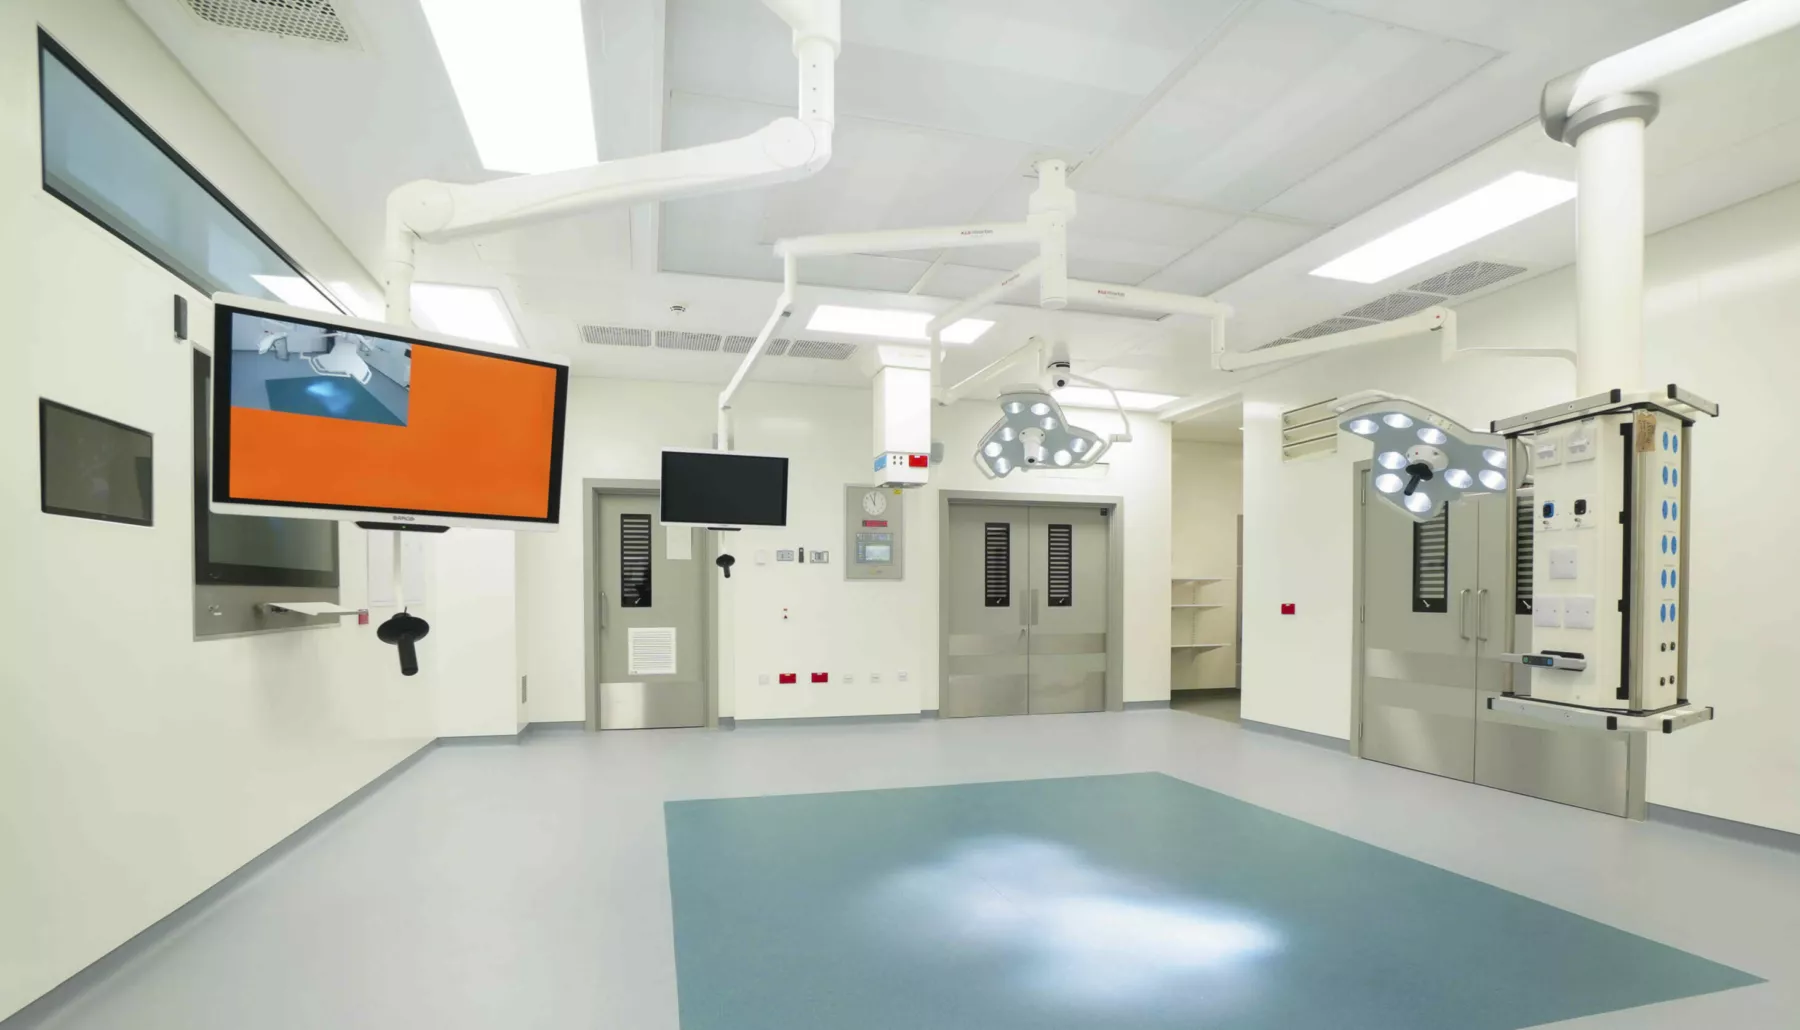 An orthopaedic operating theatre at Kirkcaldy's National Treatment Centre. The theatre is empty but has lighting and screens in place.